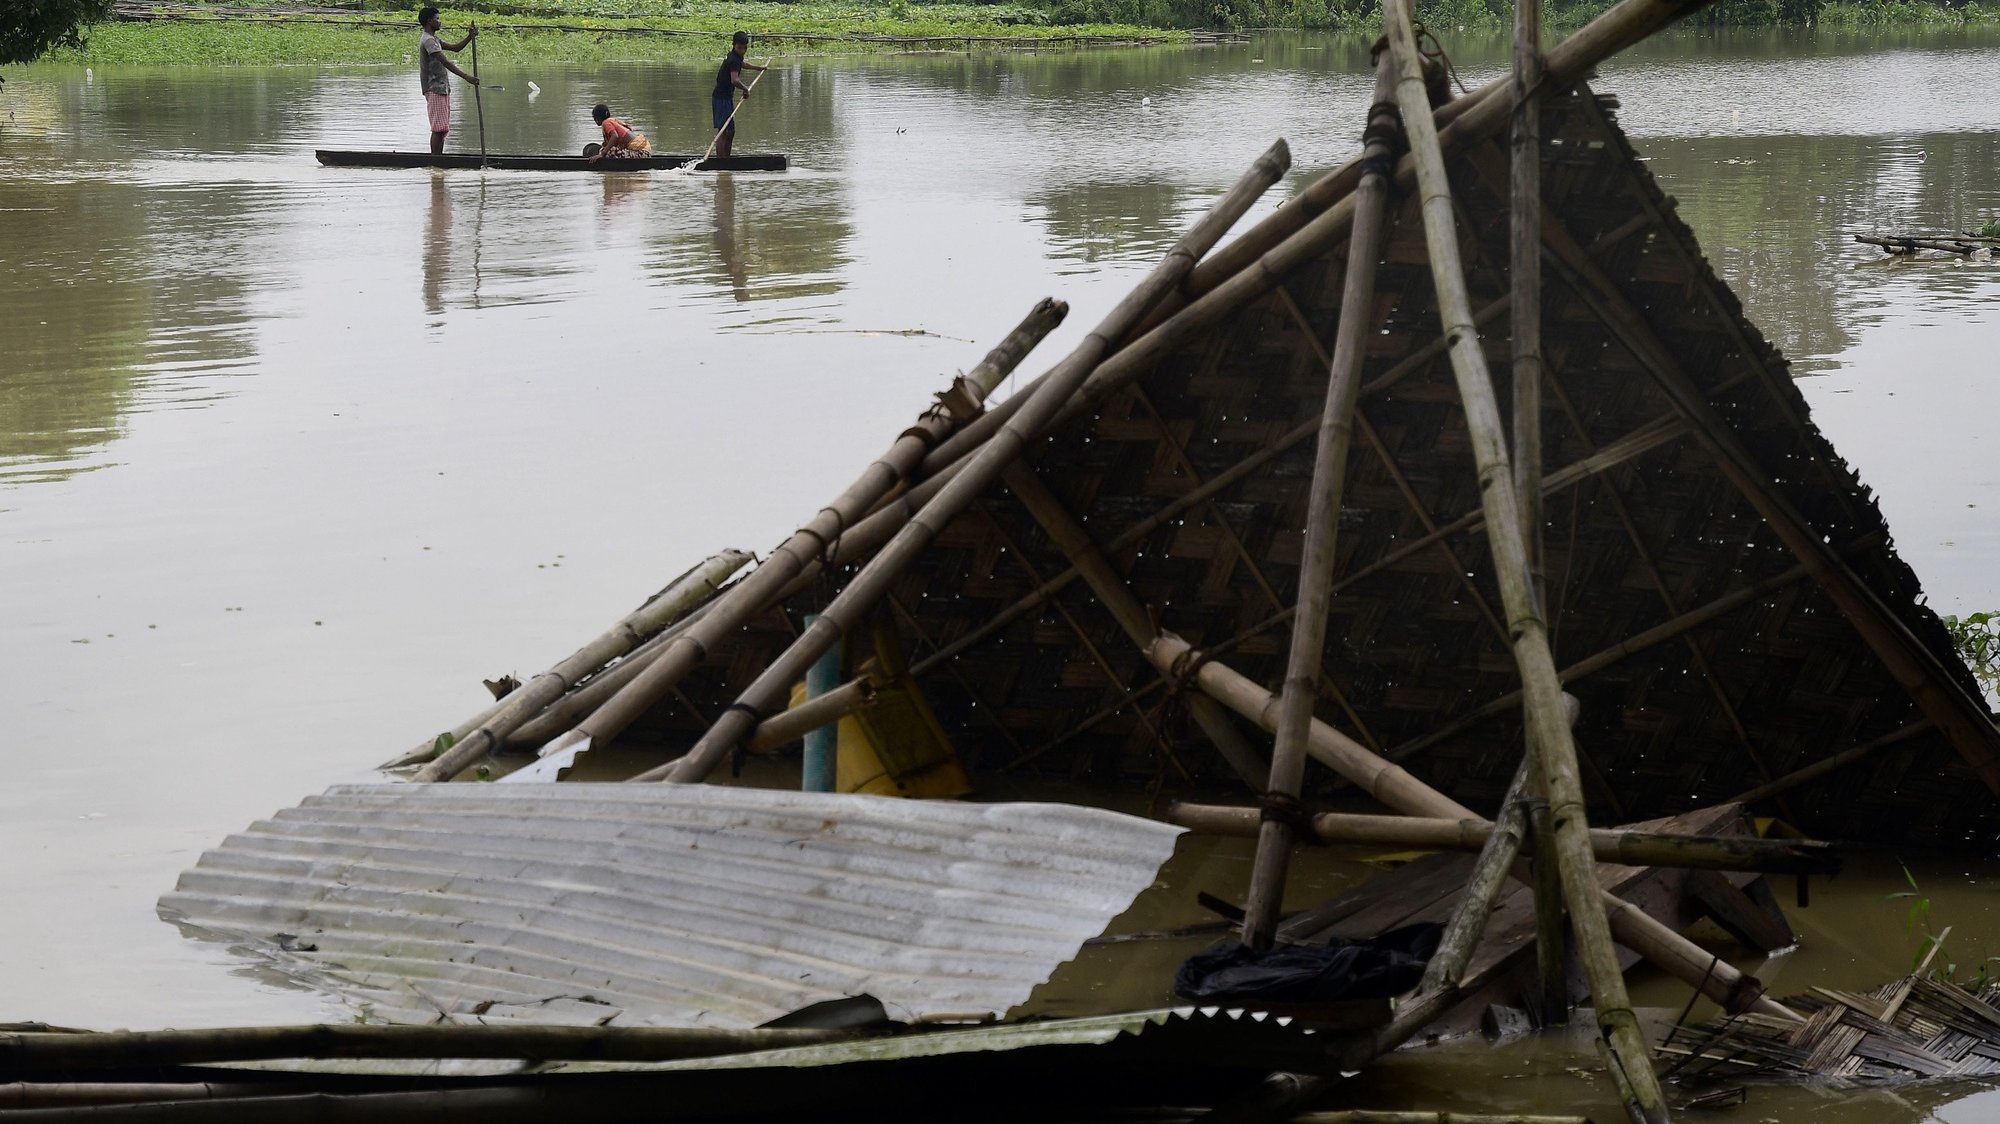 epa10023694 Indian villagers move to a safe place in the flood-affected area of Morigaon district in Assam, India, 20 June 2022. According to state government officials, over 200,000 people were being sheltered across 744 relief camps, while over 30,000 others were evacuated, as the death toll from floods and landslides in the state rose to at least 73.  EPA/STR